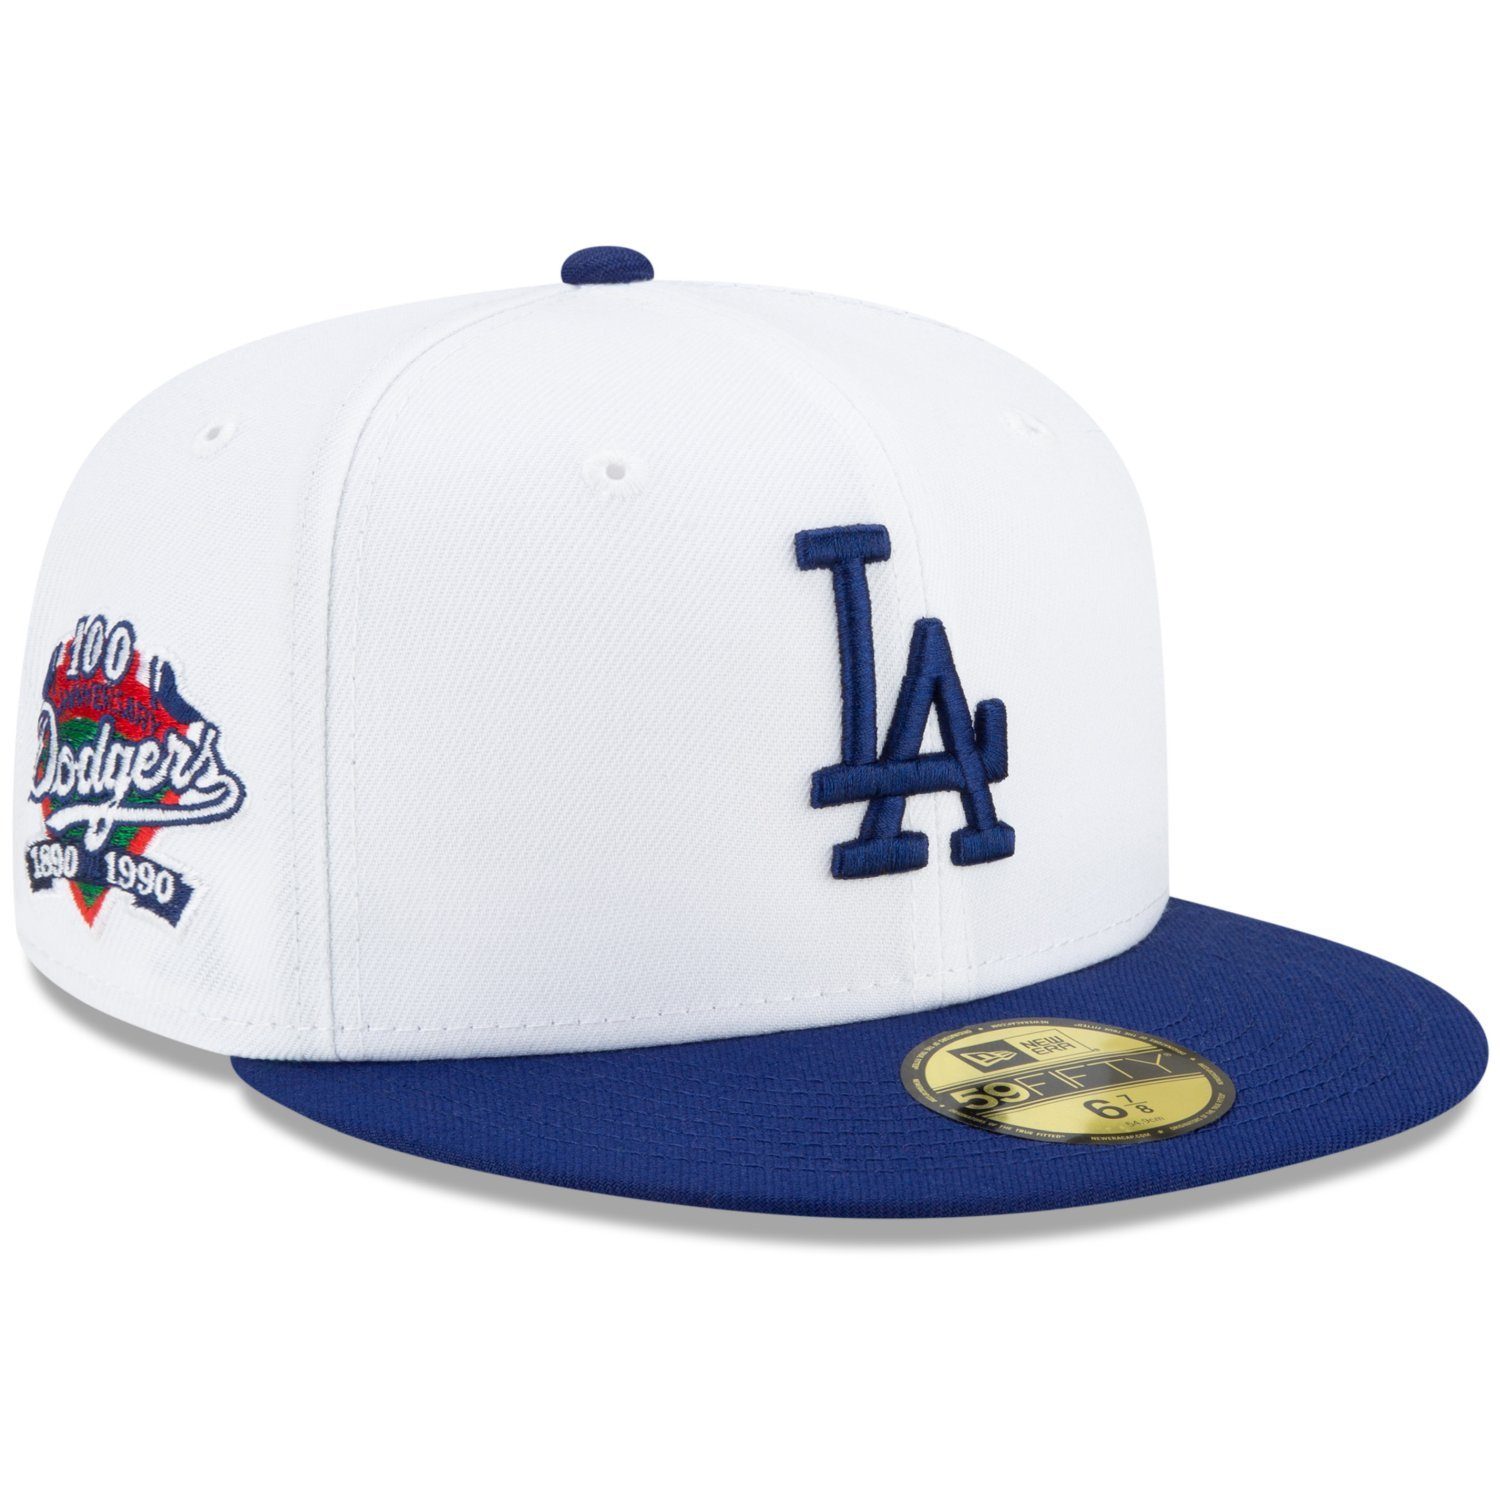 New Era Fitted Cap 59Fifty 100th ANNIVERSARY LA Dodgers